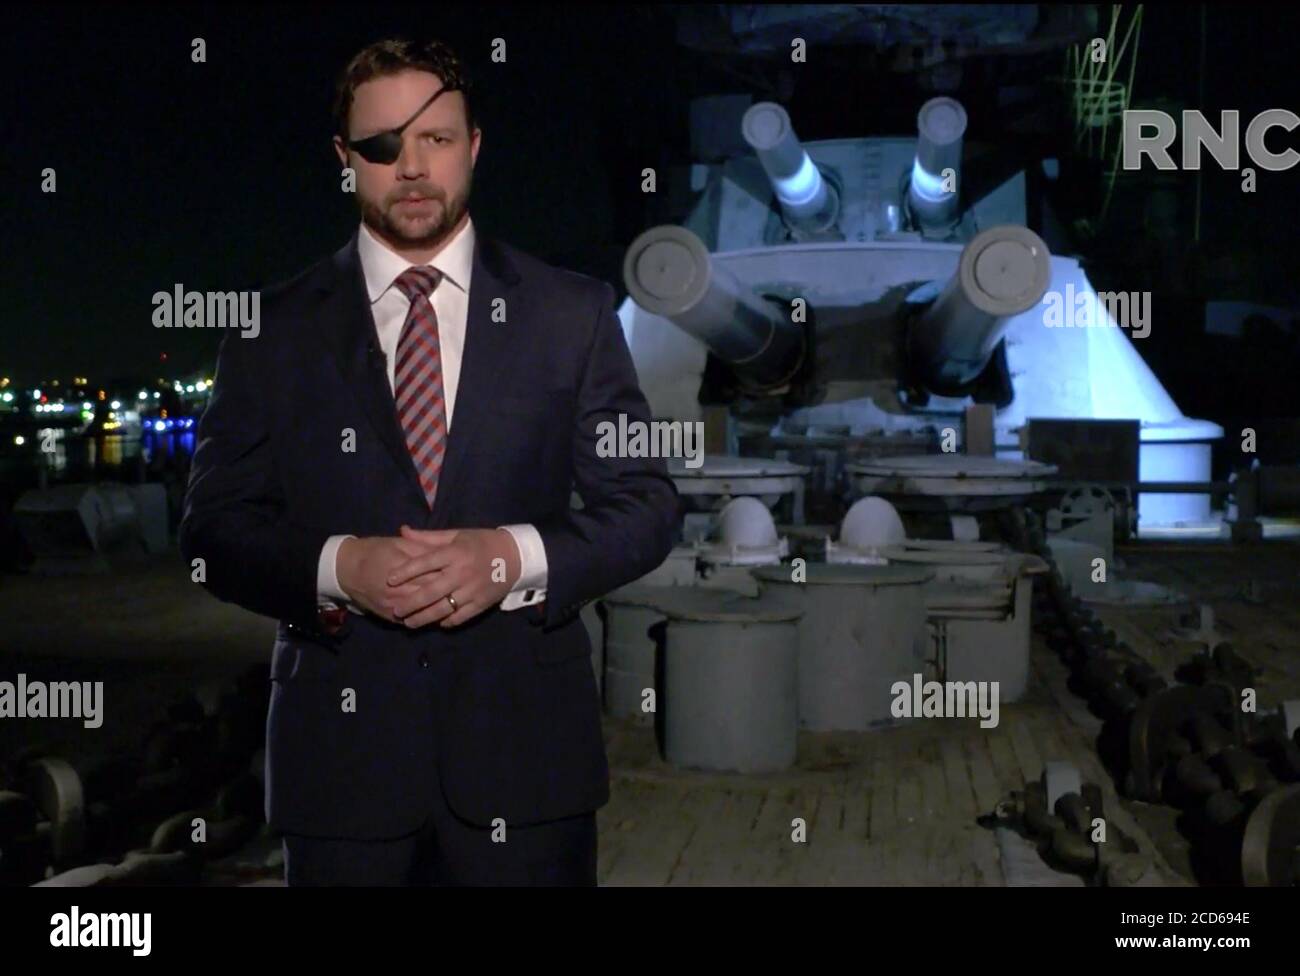 In this image from the Republican National Convention video feed, United States Representative Dan Crenshaw (Republican of Texas), makes remarks during the third day of the convention on Wednesday, August 26, 2020.Credit: Republican National Convention via CNP | usage worldwide Stock Photo